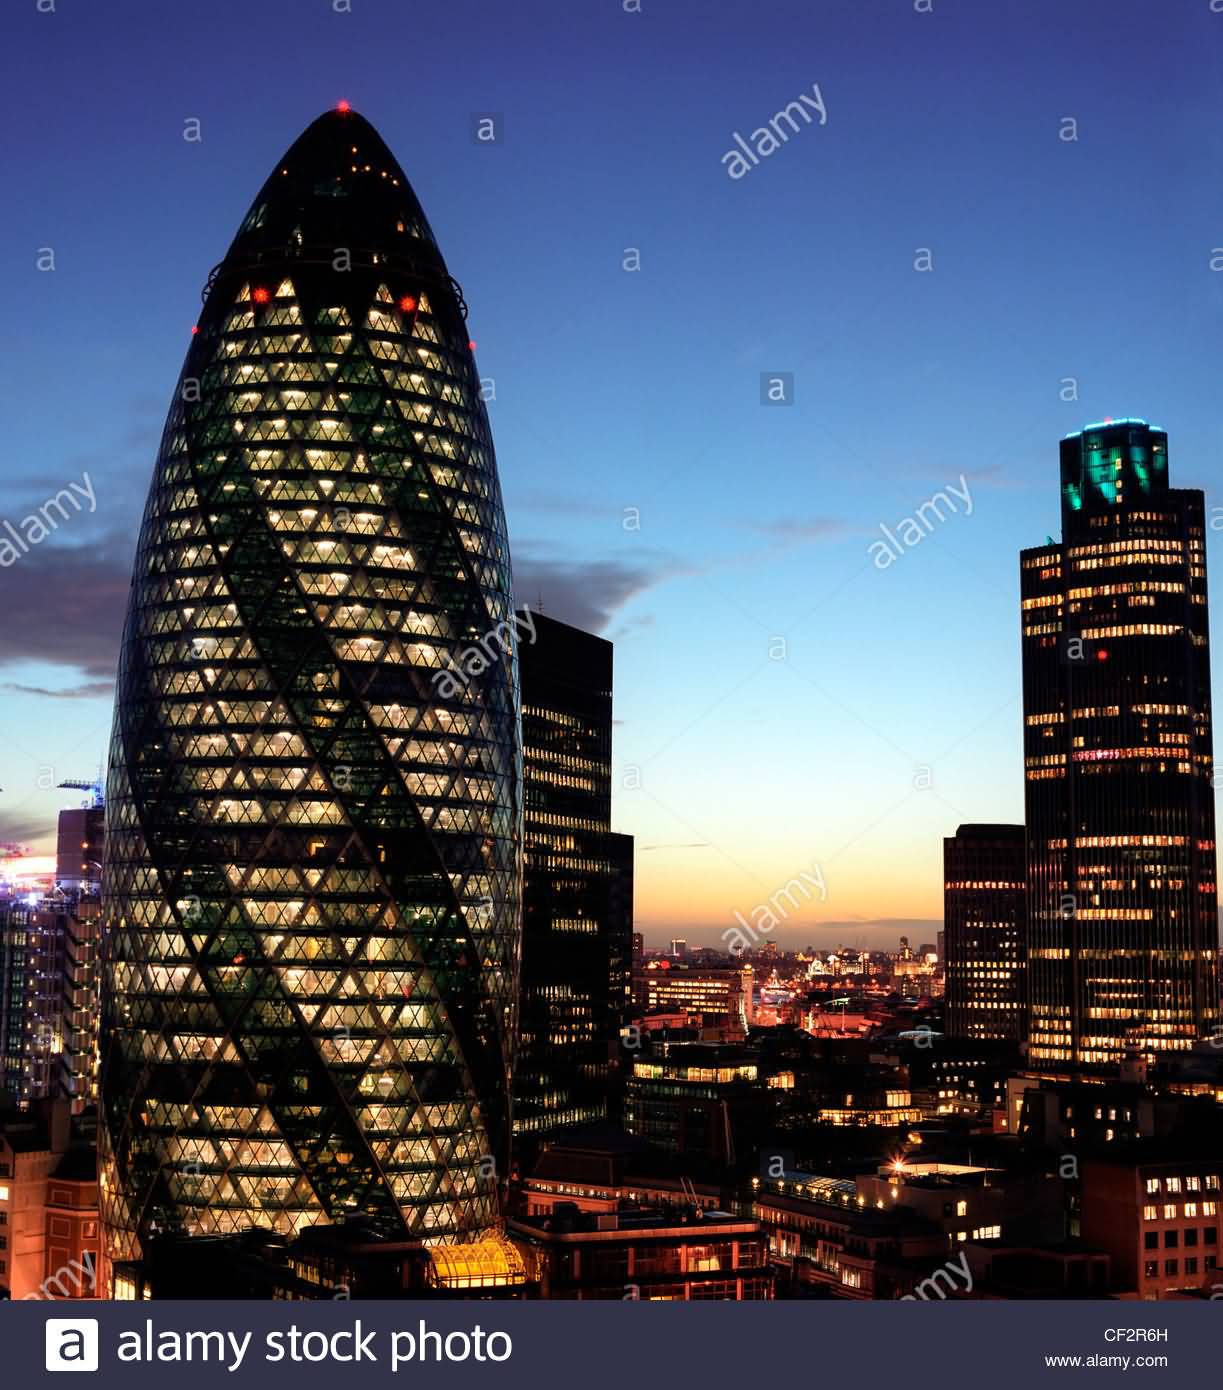 Night View Of The Gherkin And Natwest Tower Buildings